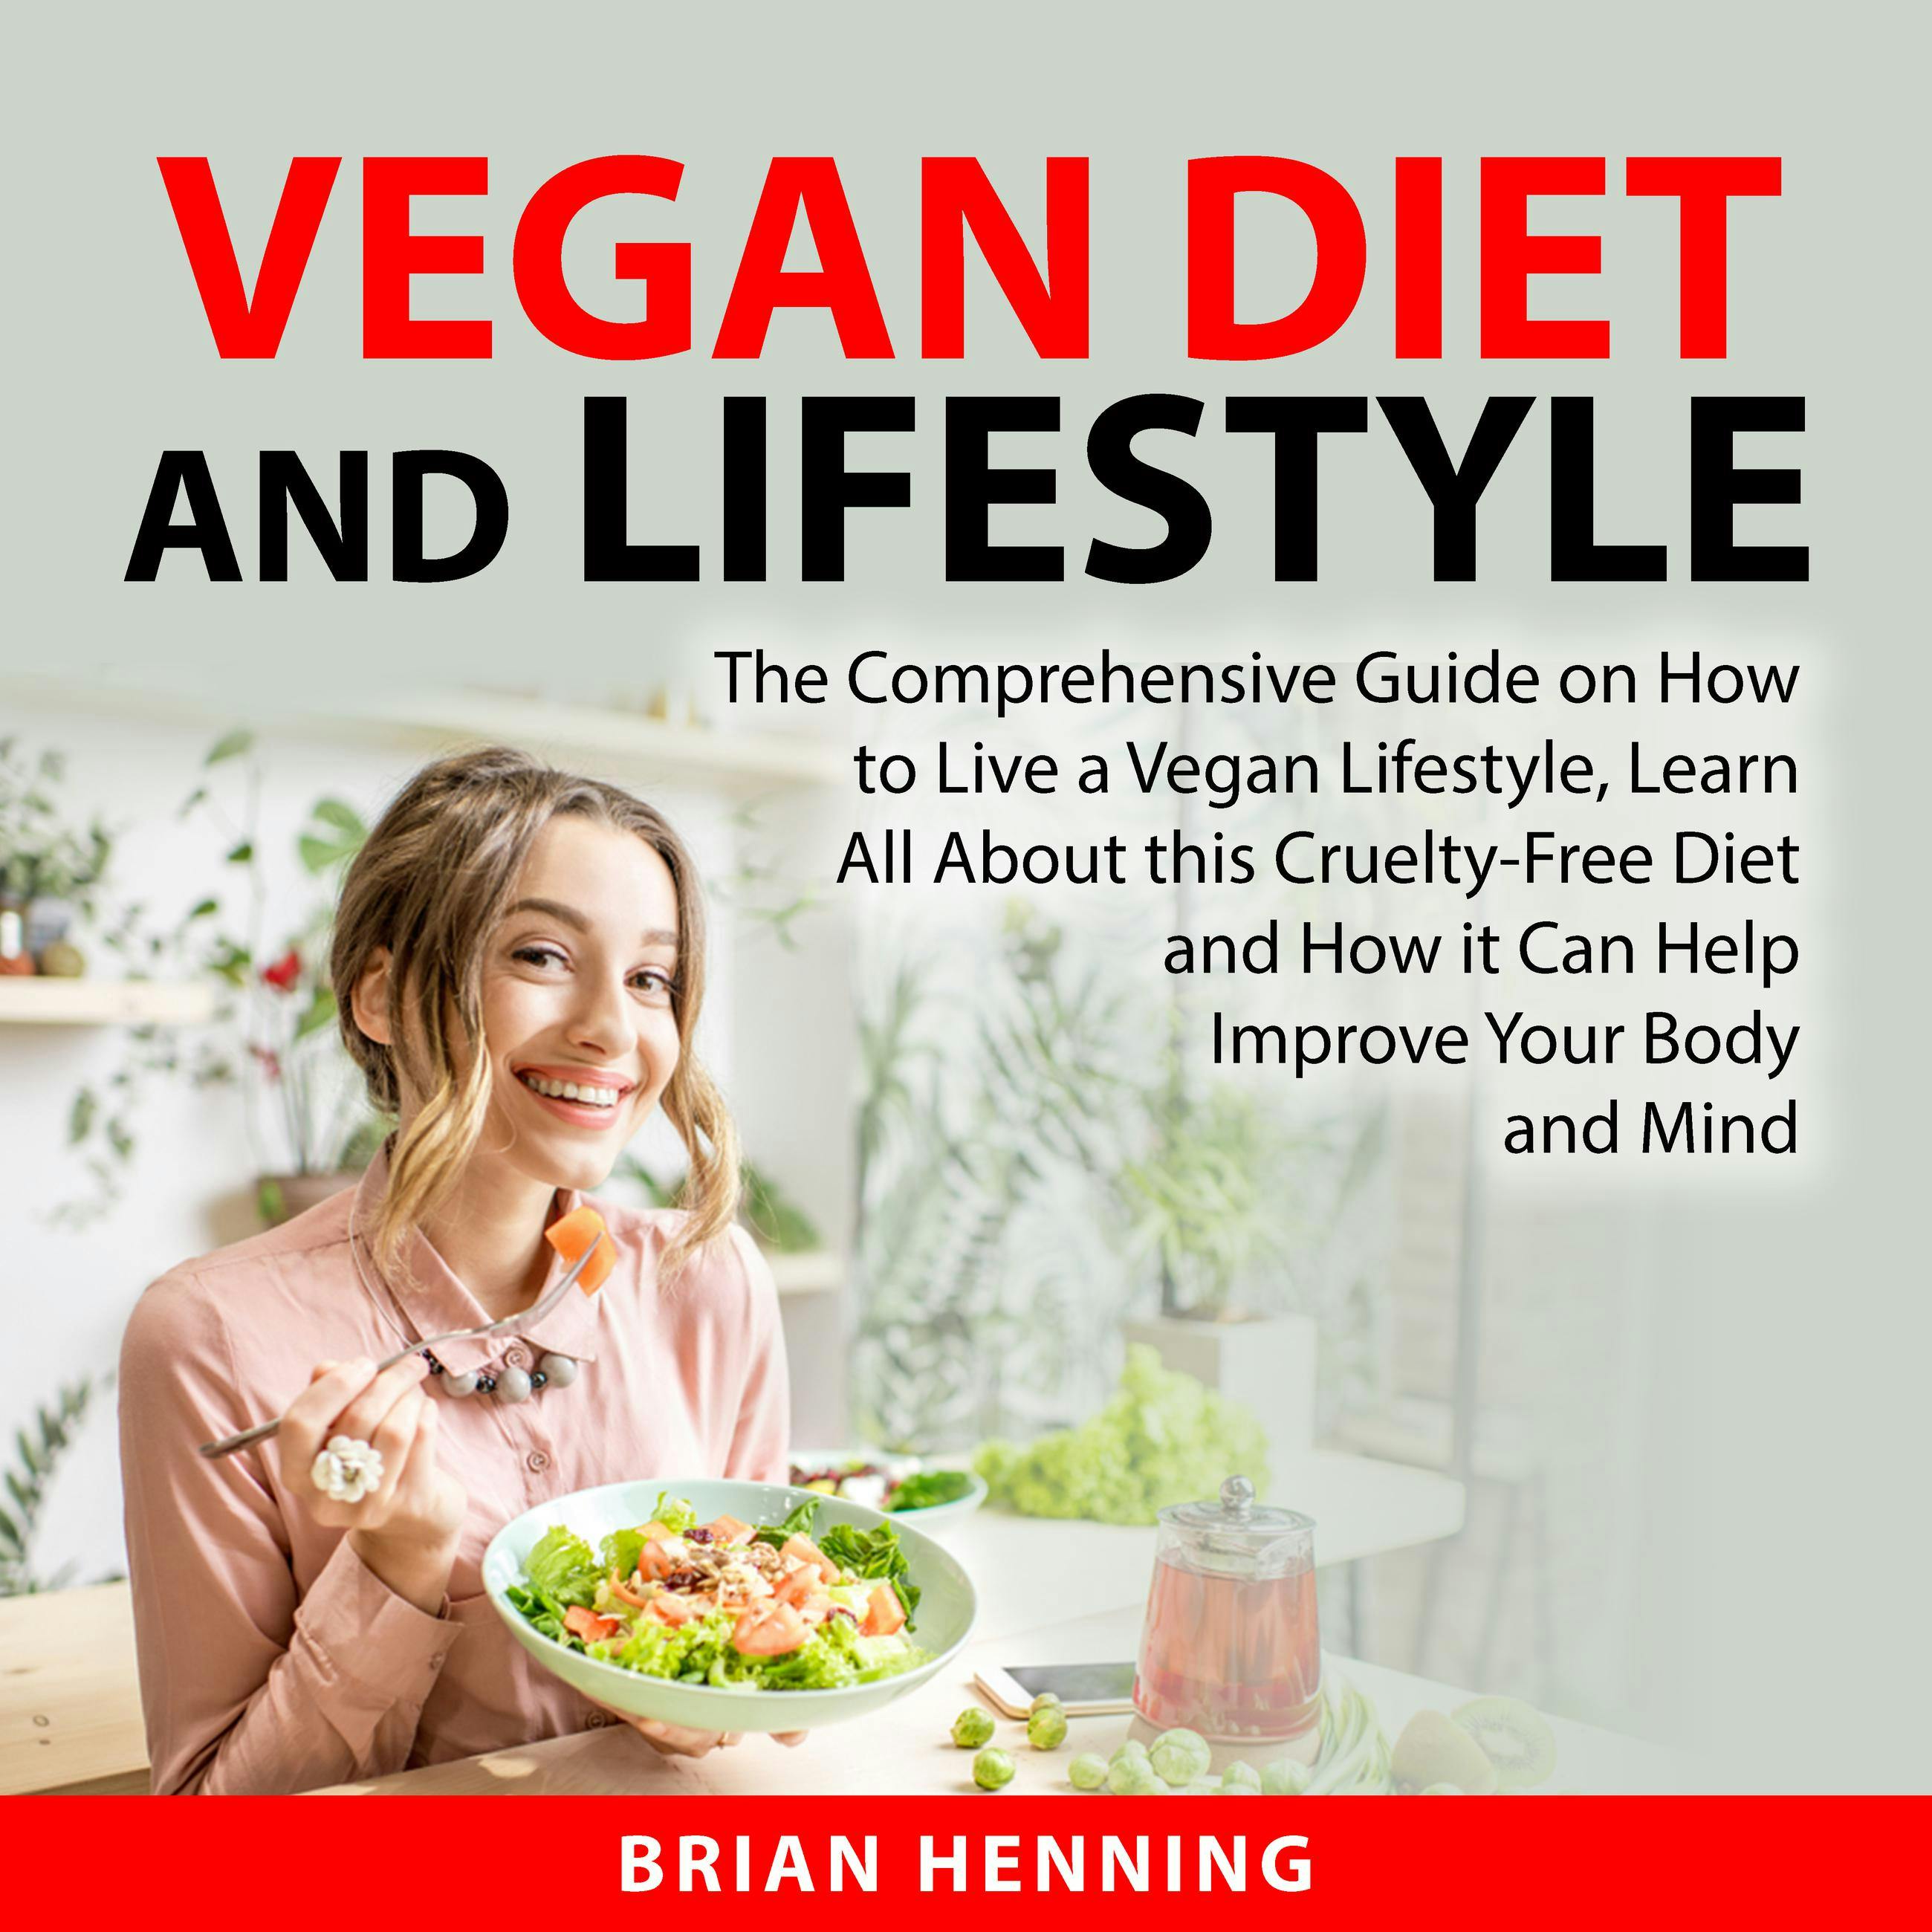 Vegan Diet and Lifestyle: The Comprehensive Guide on How to Live a Vegan Lifestyle, Learn All About this Cruelty-Free Diet and How it Can Help Improve Your Body and Mind - undefined